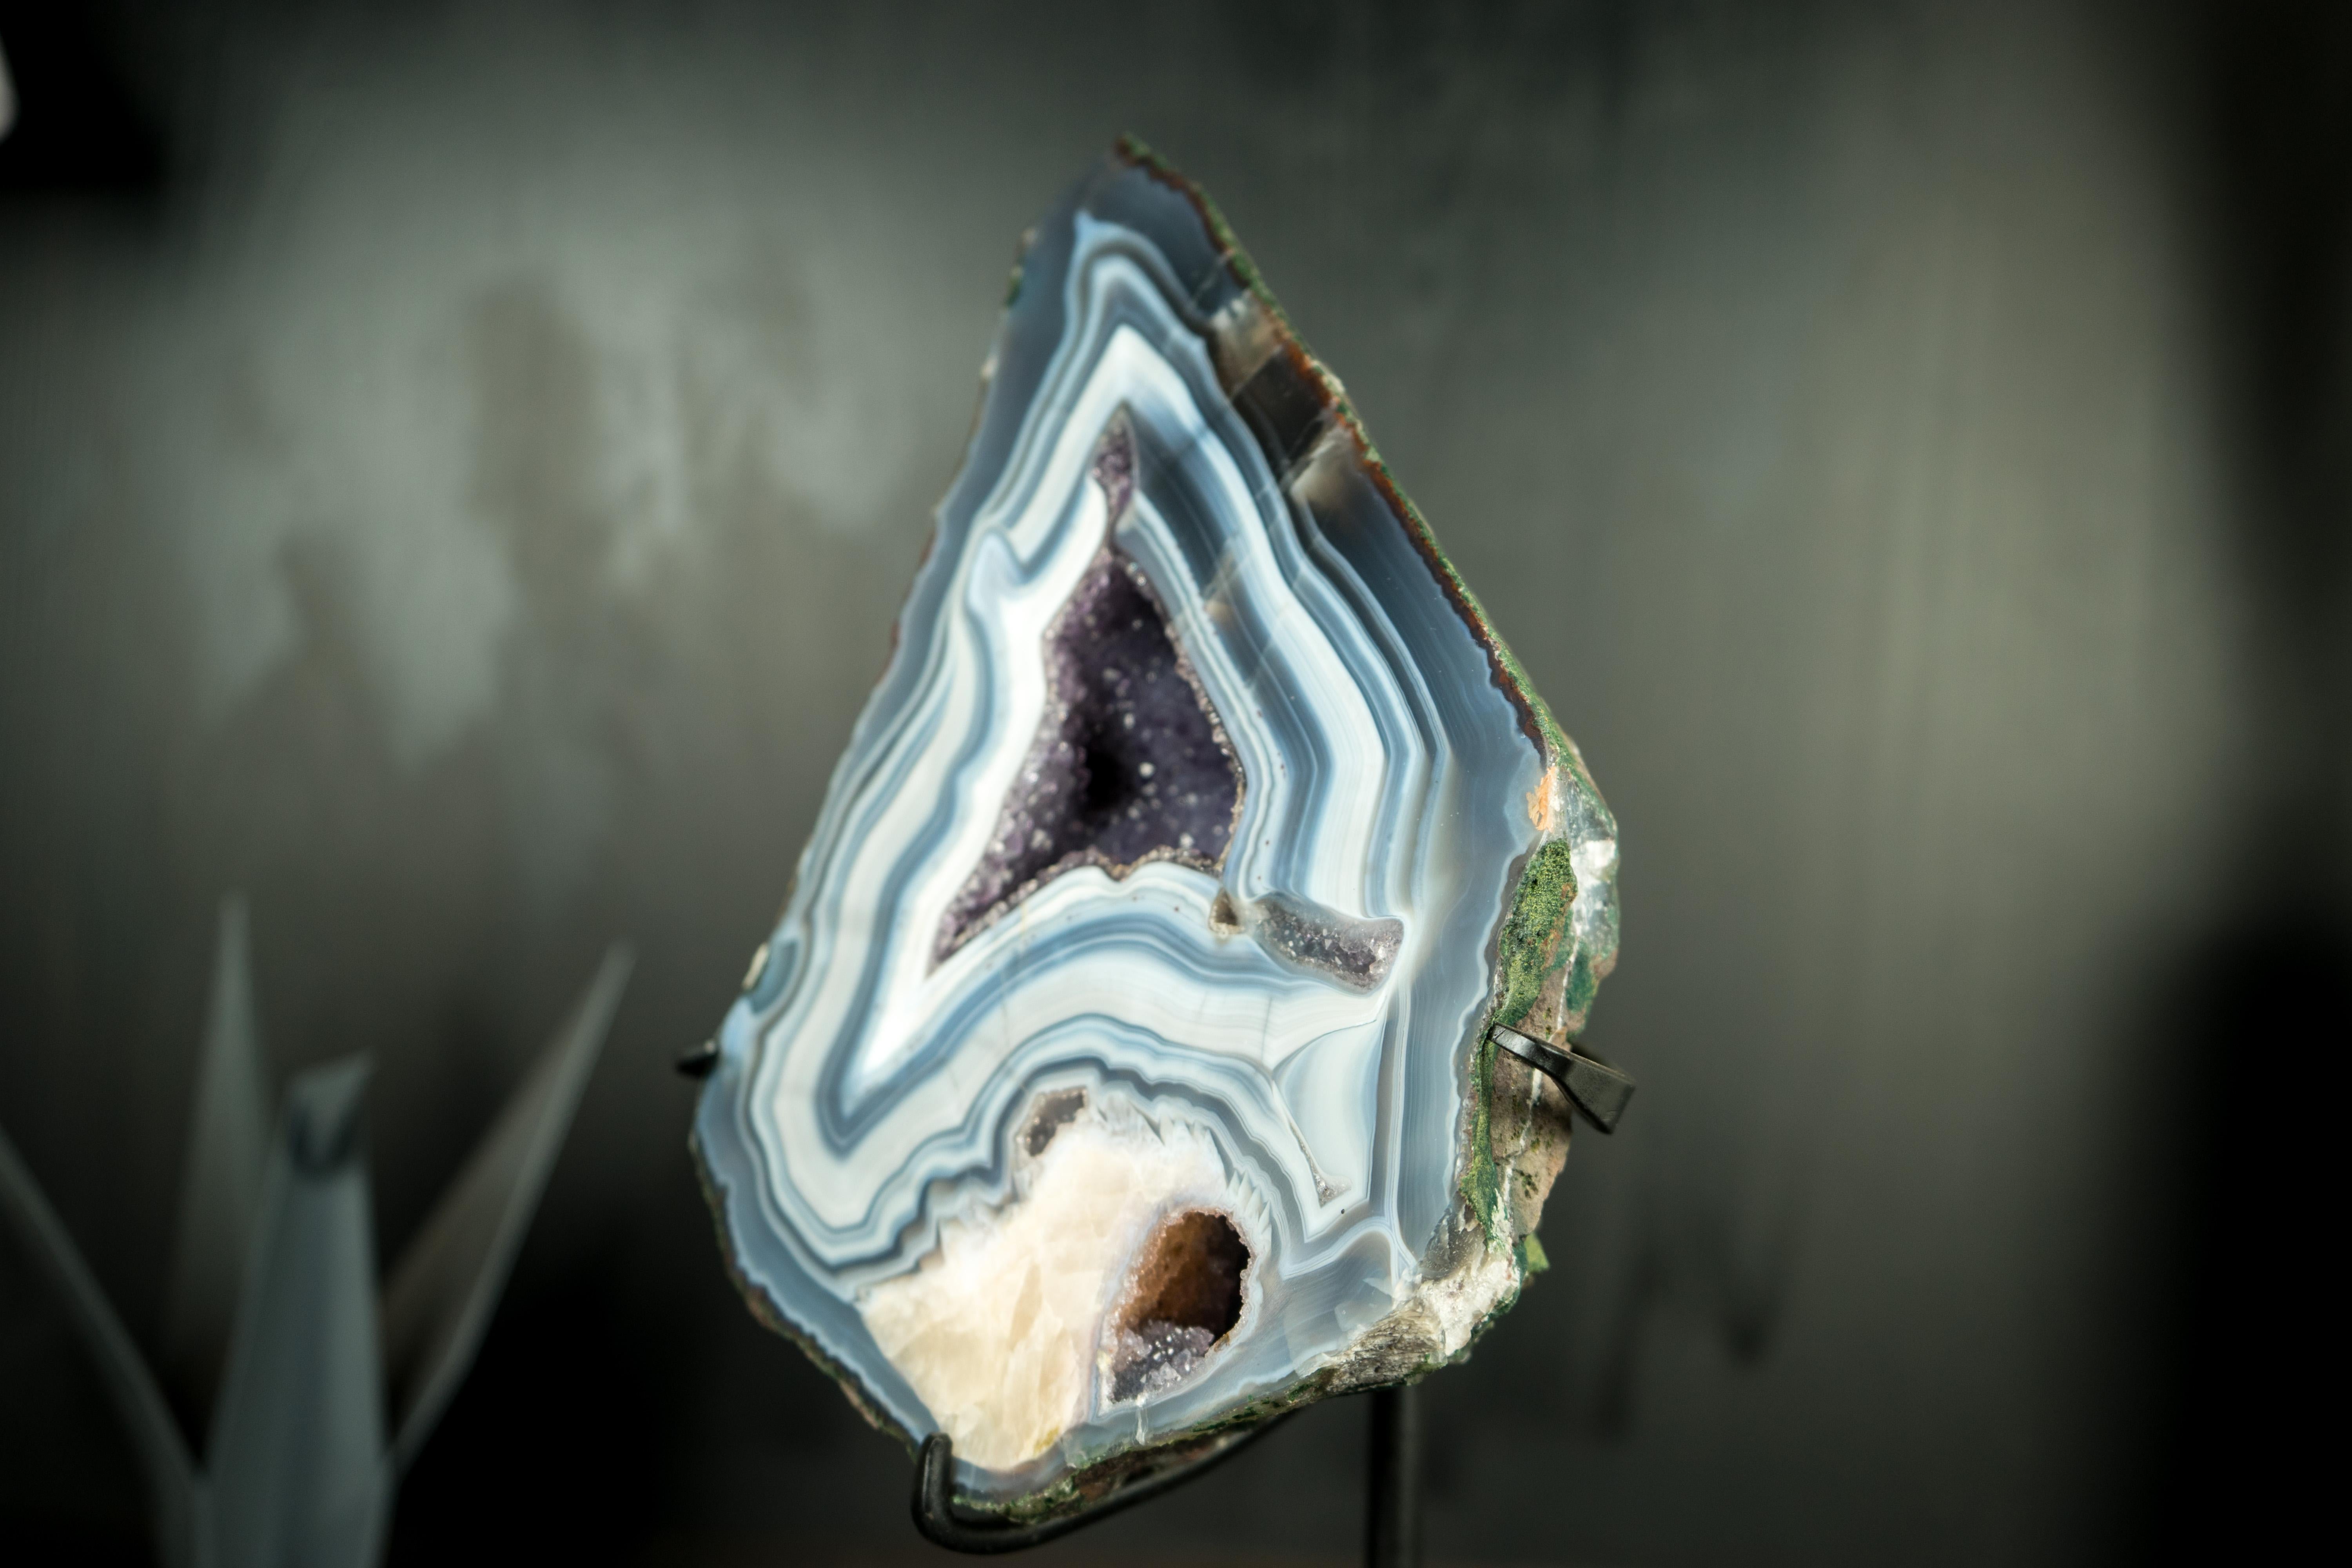 Brazilian Blue and White Lace Agate Geode with Calcite Flower Inclusion: A Rare Agate For Sale